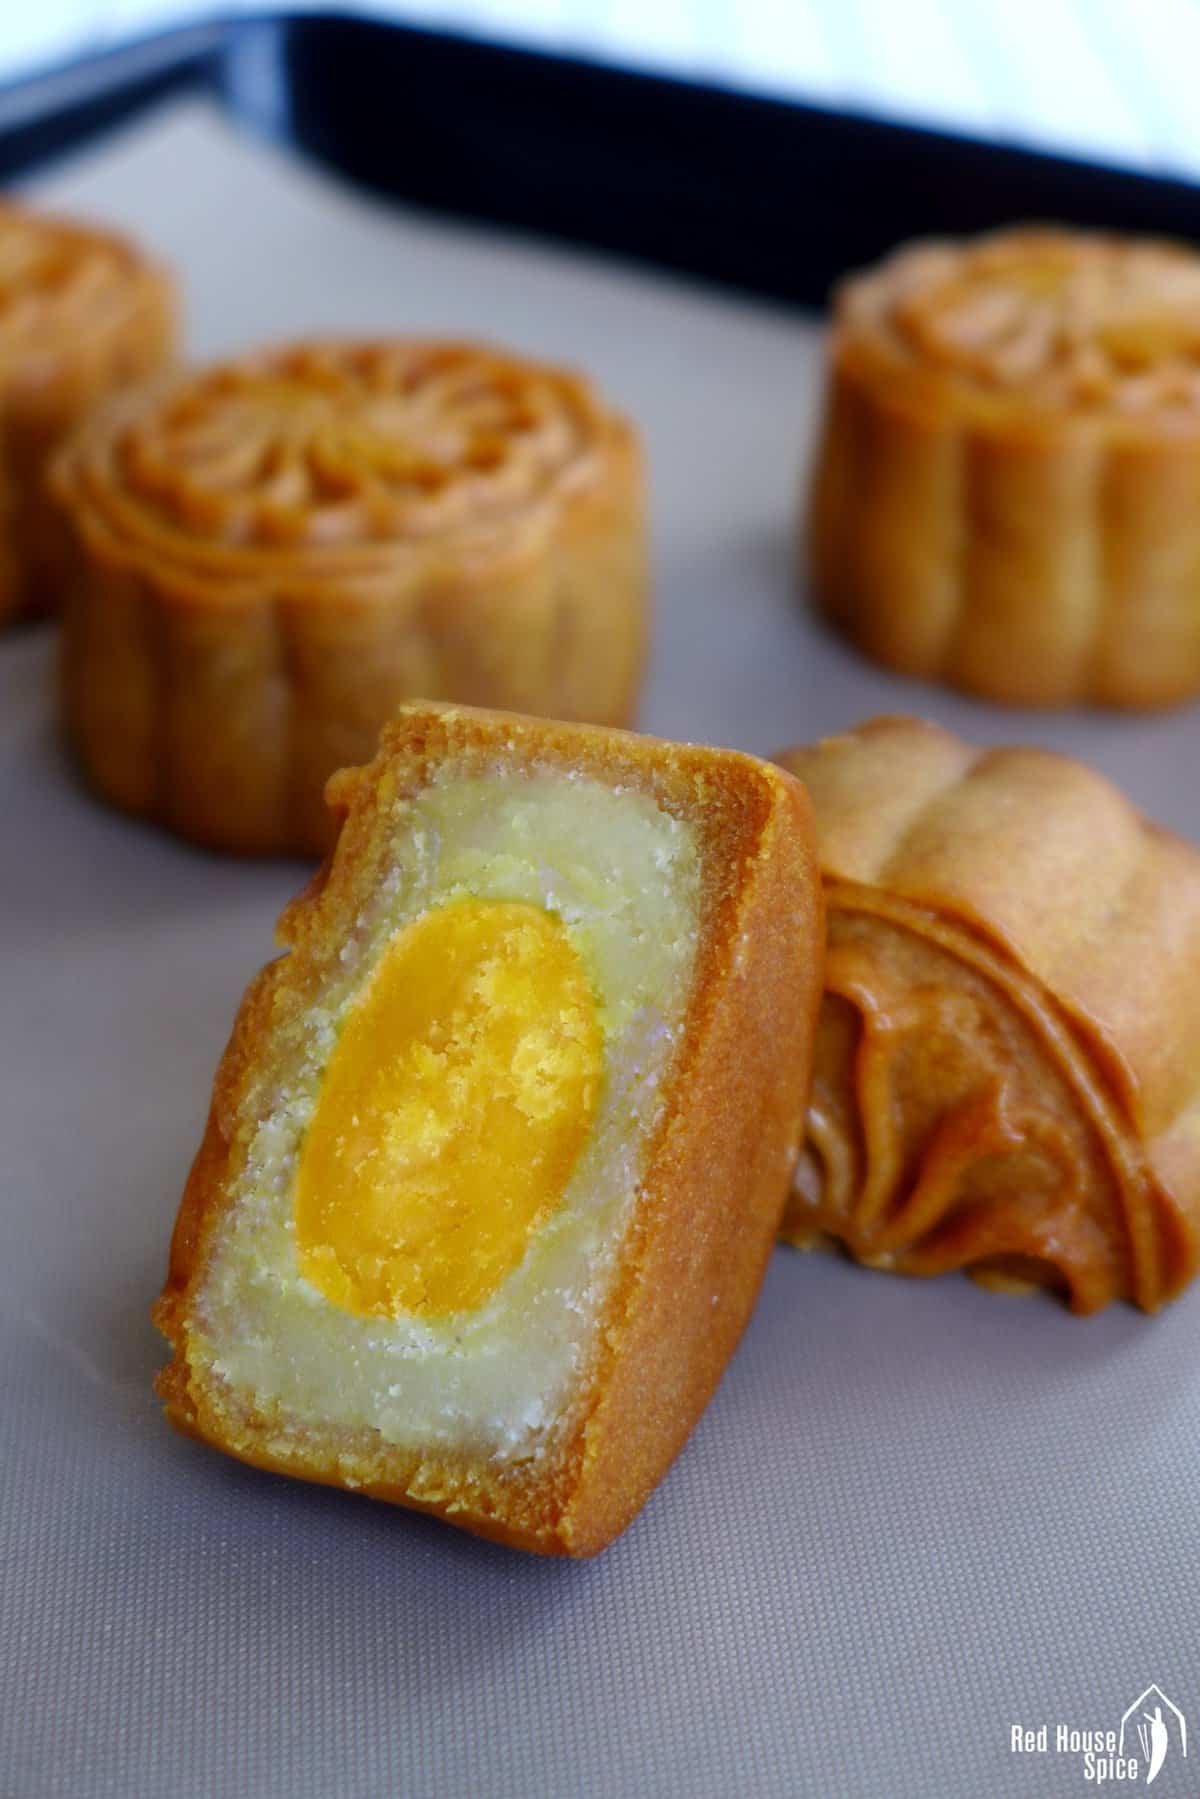 A halved mooncake showing its lotus paste and salted yolk filling.